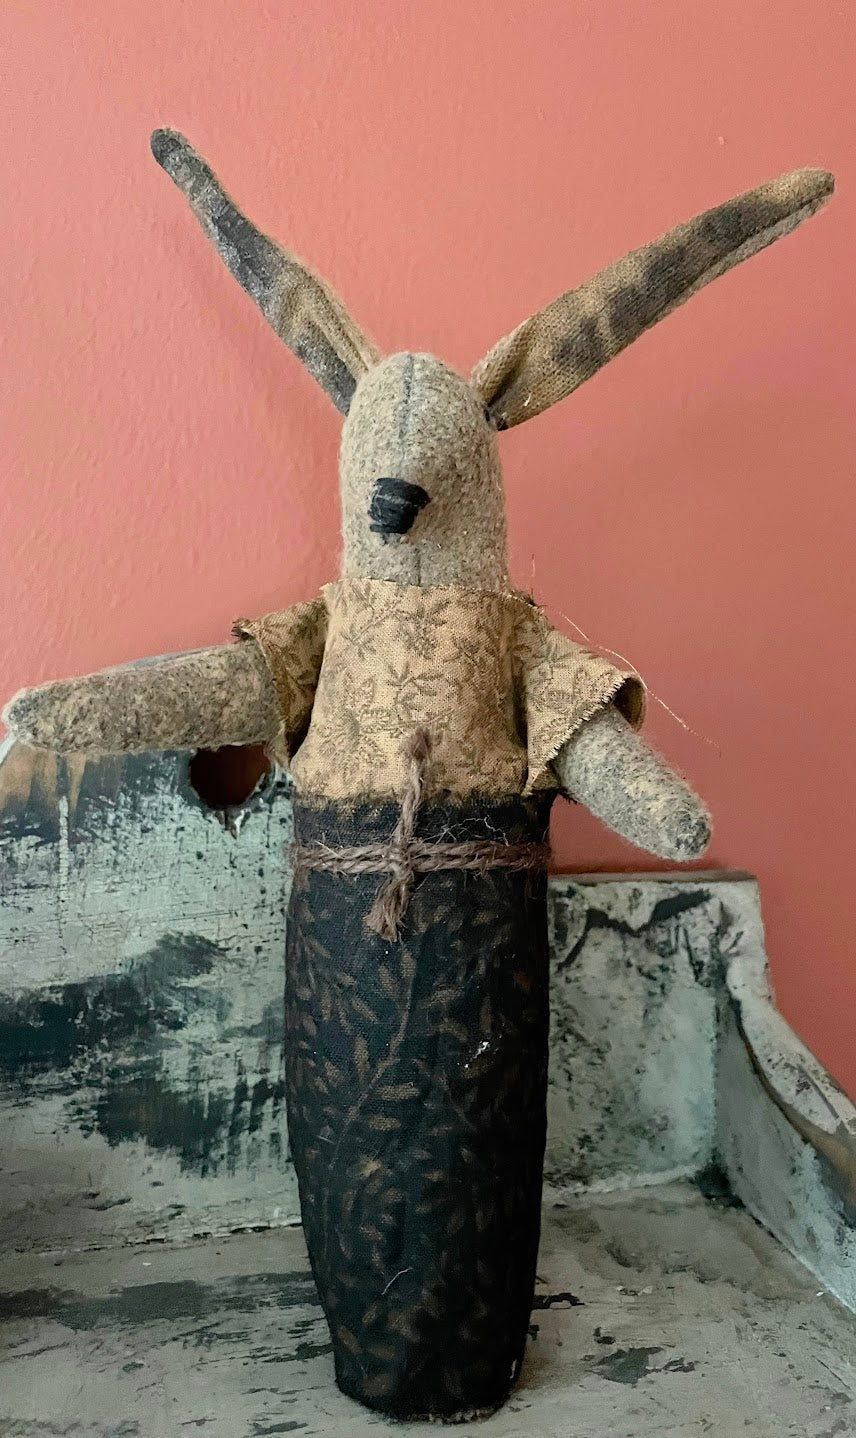 Primitive Colonial Handcrafted 9” Bunny Stump Doll Early American